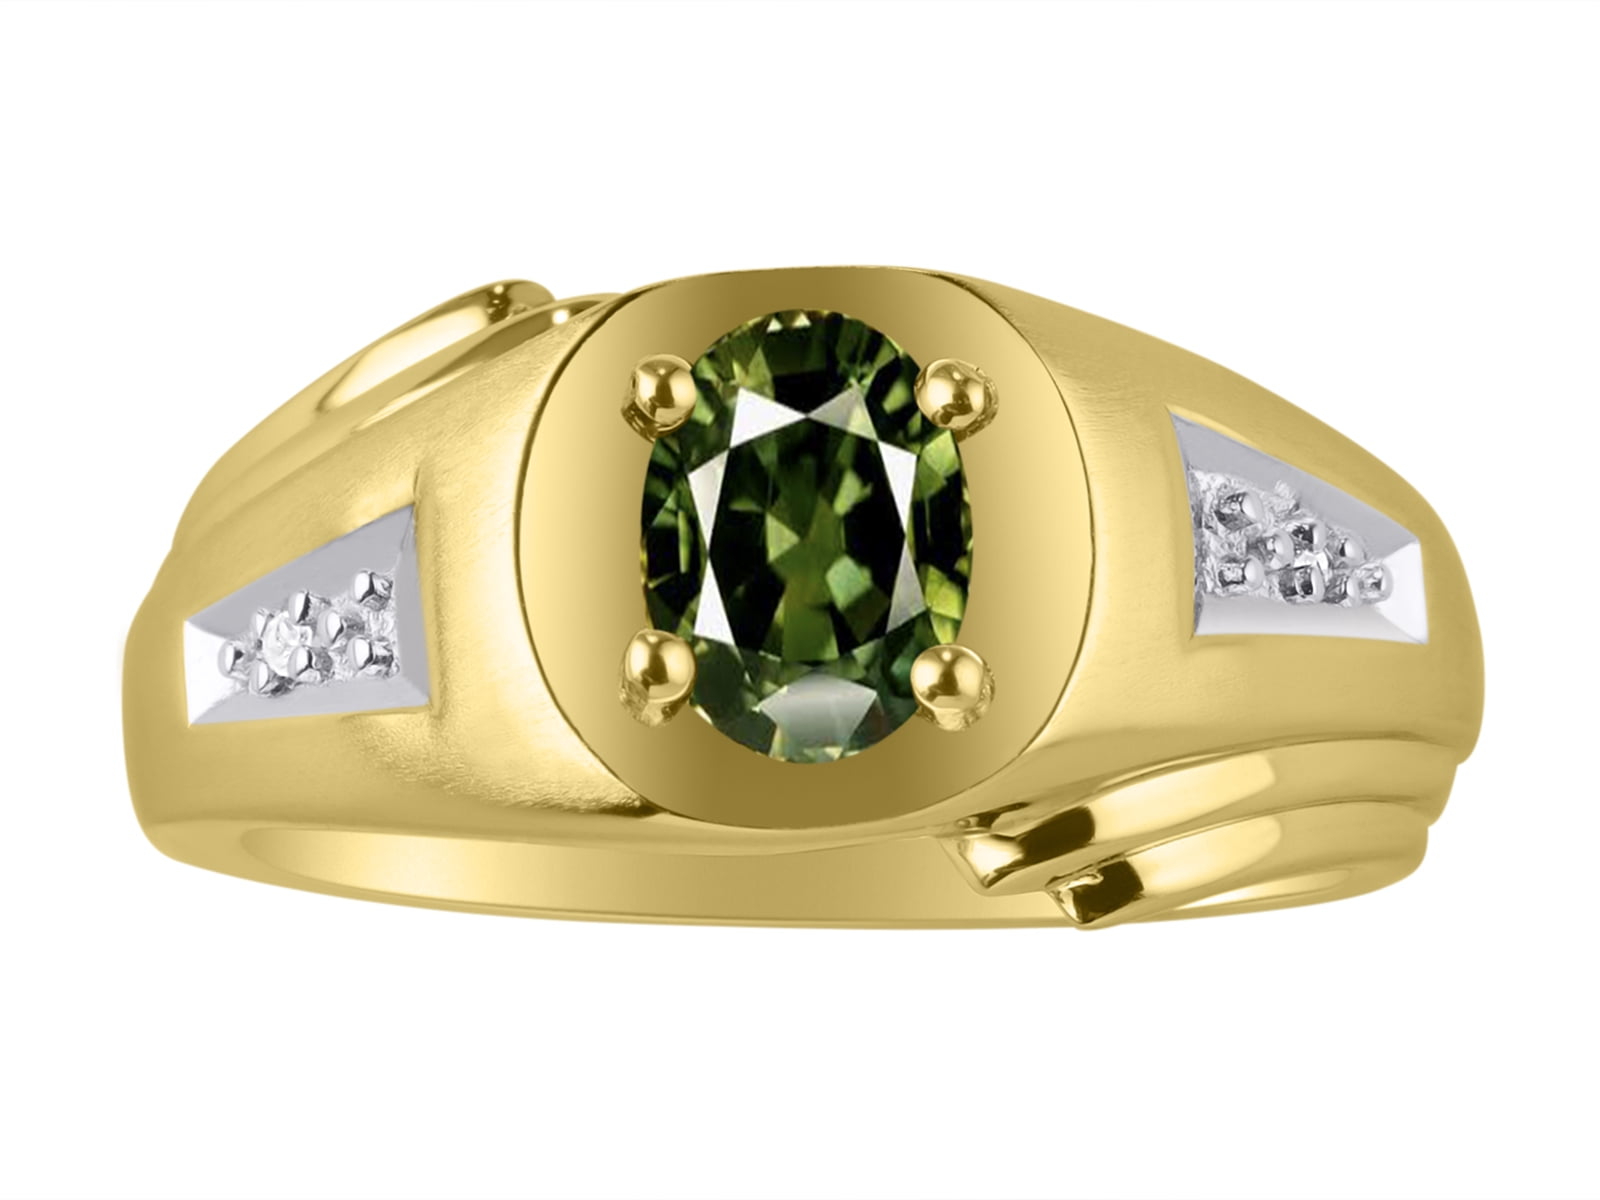 RYLOS Ladies Ring with Oval Shape Gemstone /& Genuine Sparkling Diamonds in 14K Yellow Gold Plated Silver .925-6X4MM Color Stone